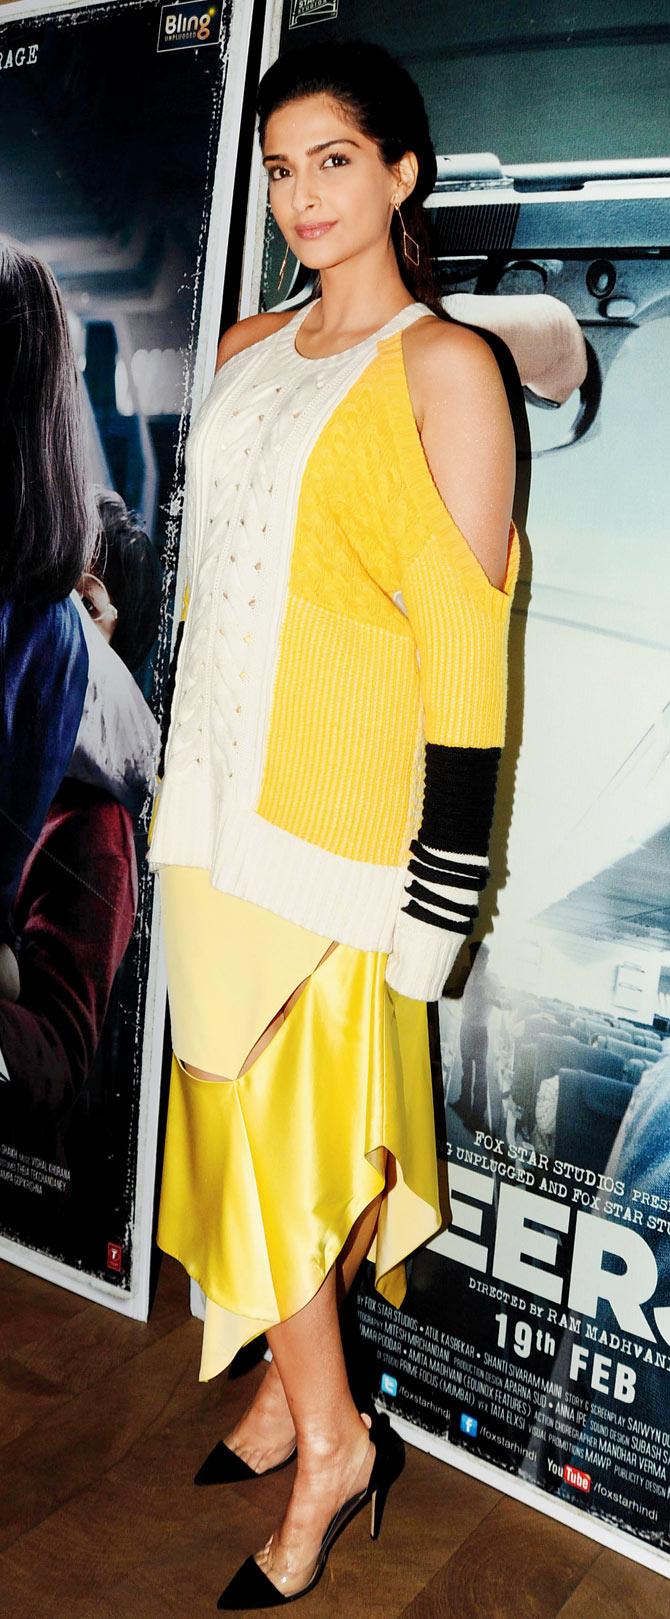 Sonam Kapoor in a bulky sweater over a dainty dress by Prabal Gurung. Pic/AFP